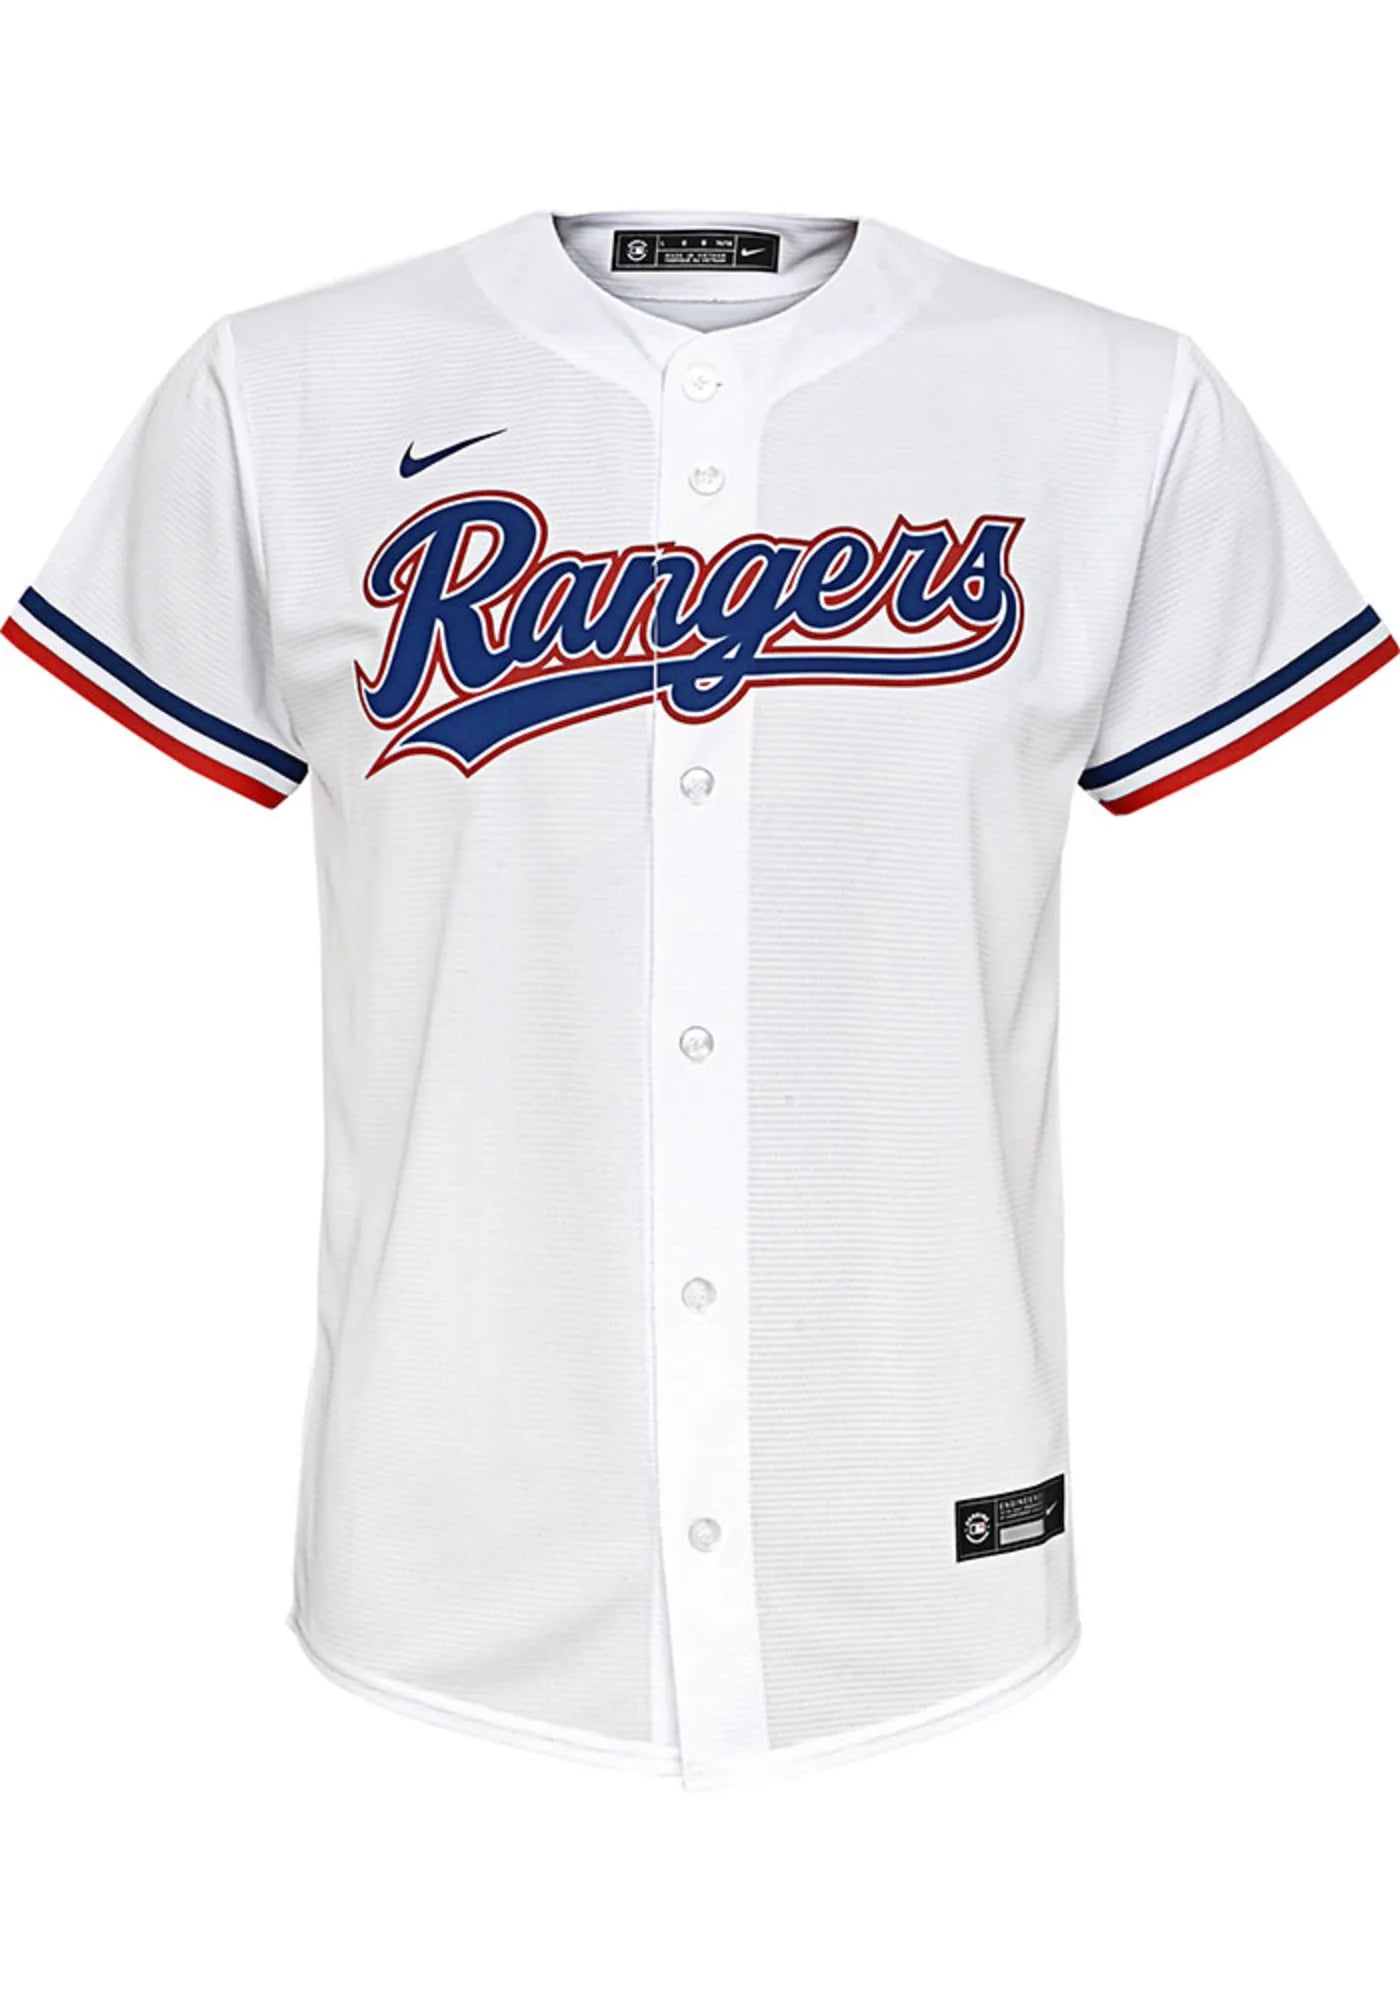 Youth Nike Corey Seager Texas Rangers White Home Replica Jersey